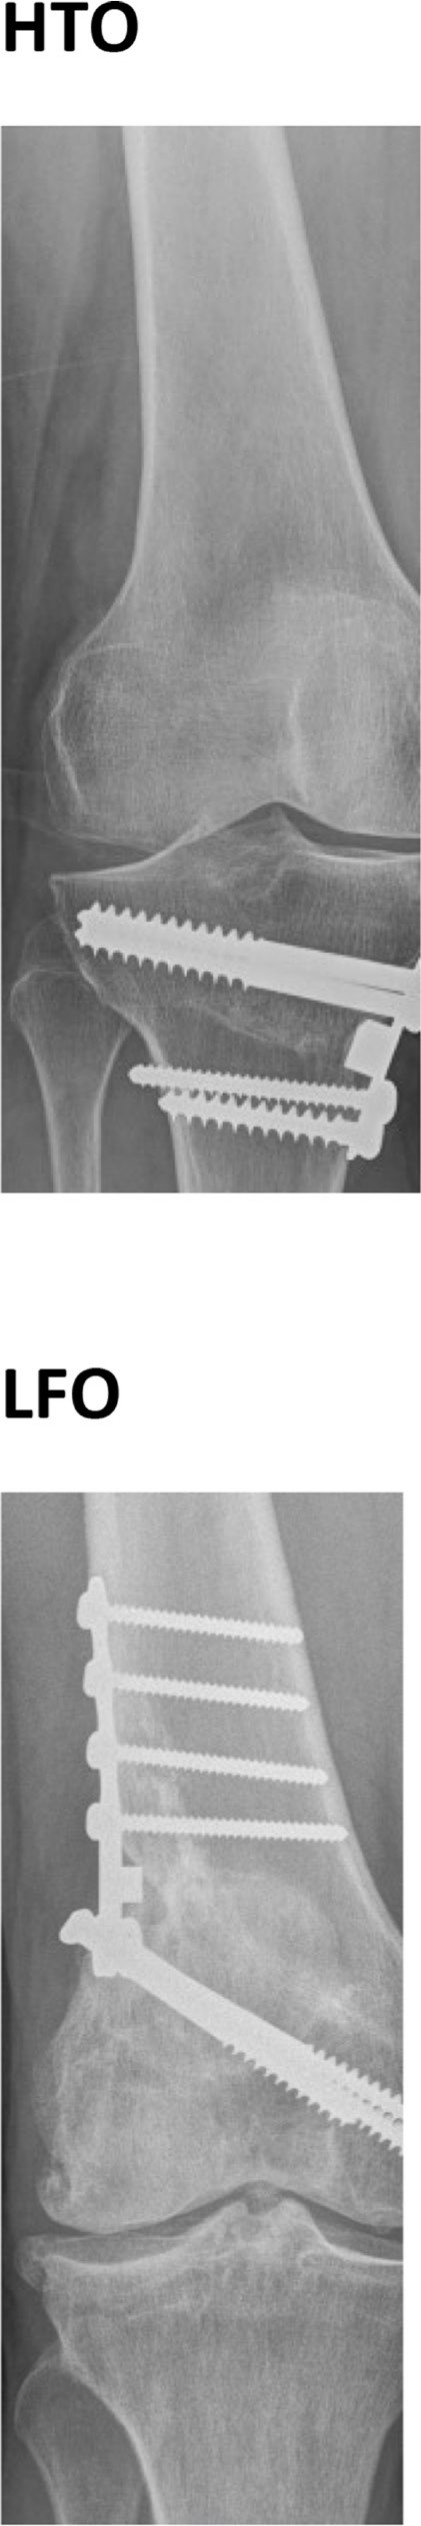 Fig. 1 
          High tibial osteotomy (HTO) ten years after an angular correction of 8° and low femoral osteotomy (LFO) ten years after an angular correction of 6° (frontal views). Note the open medial, respectively lateral joint spaces. Both patients had a good knee function.
        